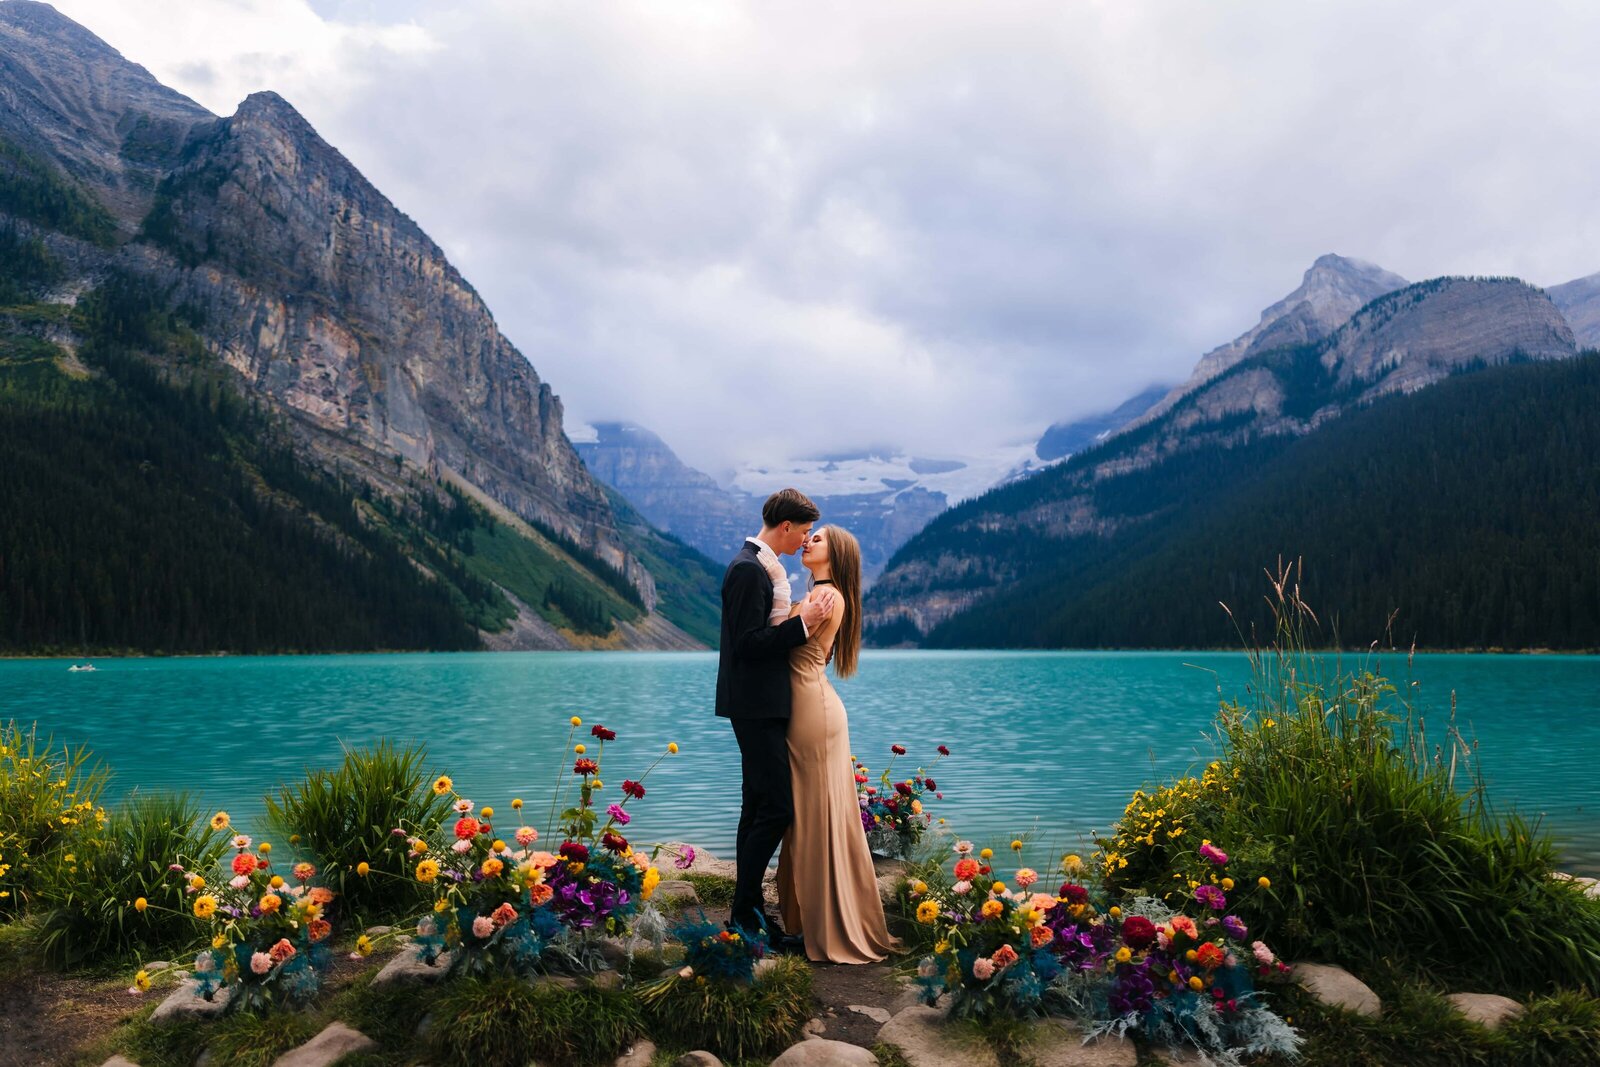 A lovely elopement of a couple at Lake Louise in Banff.